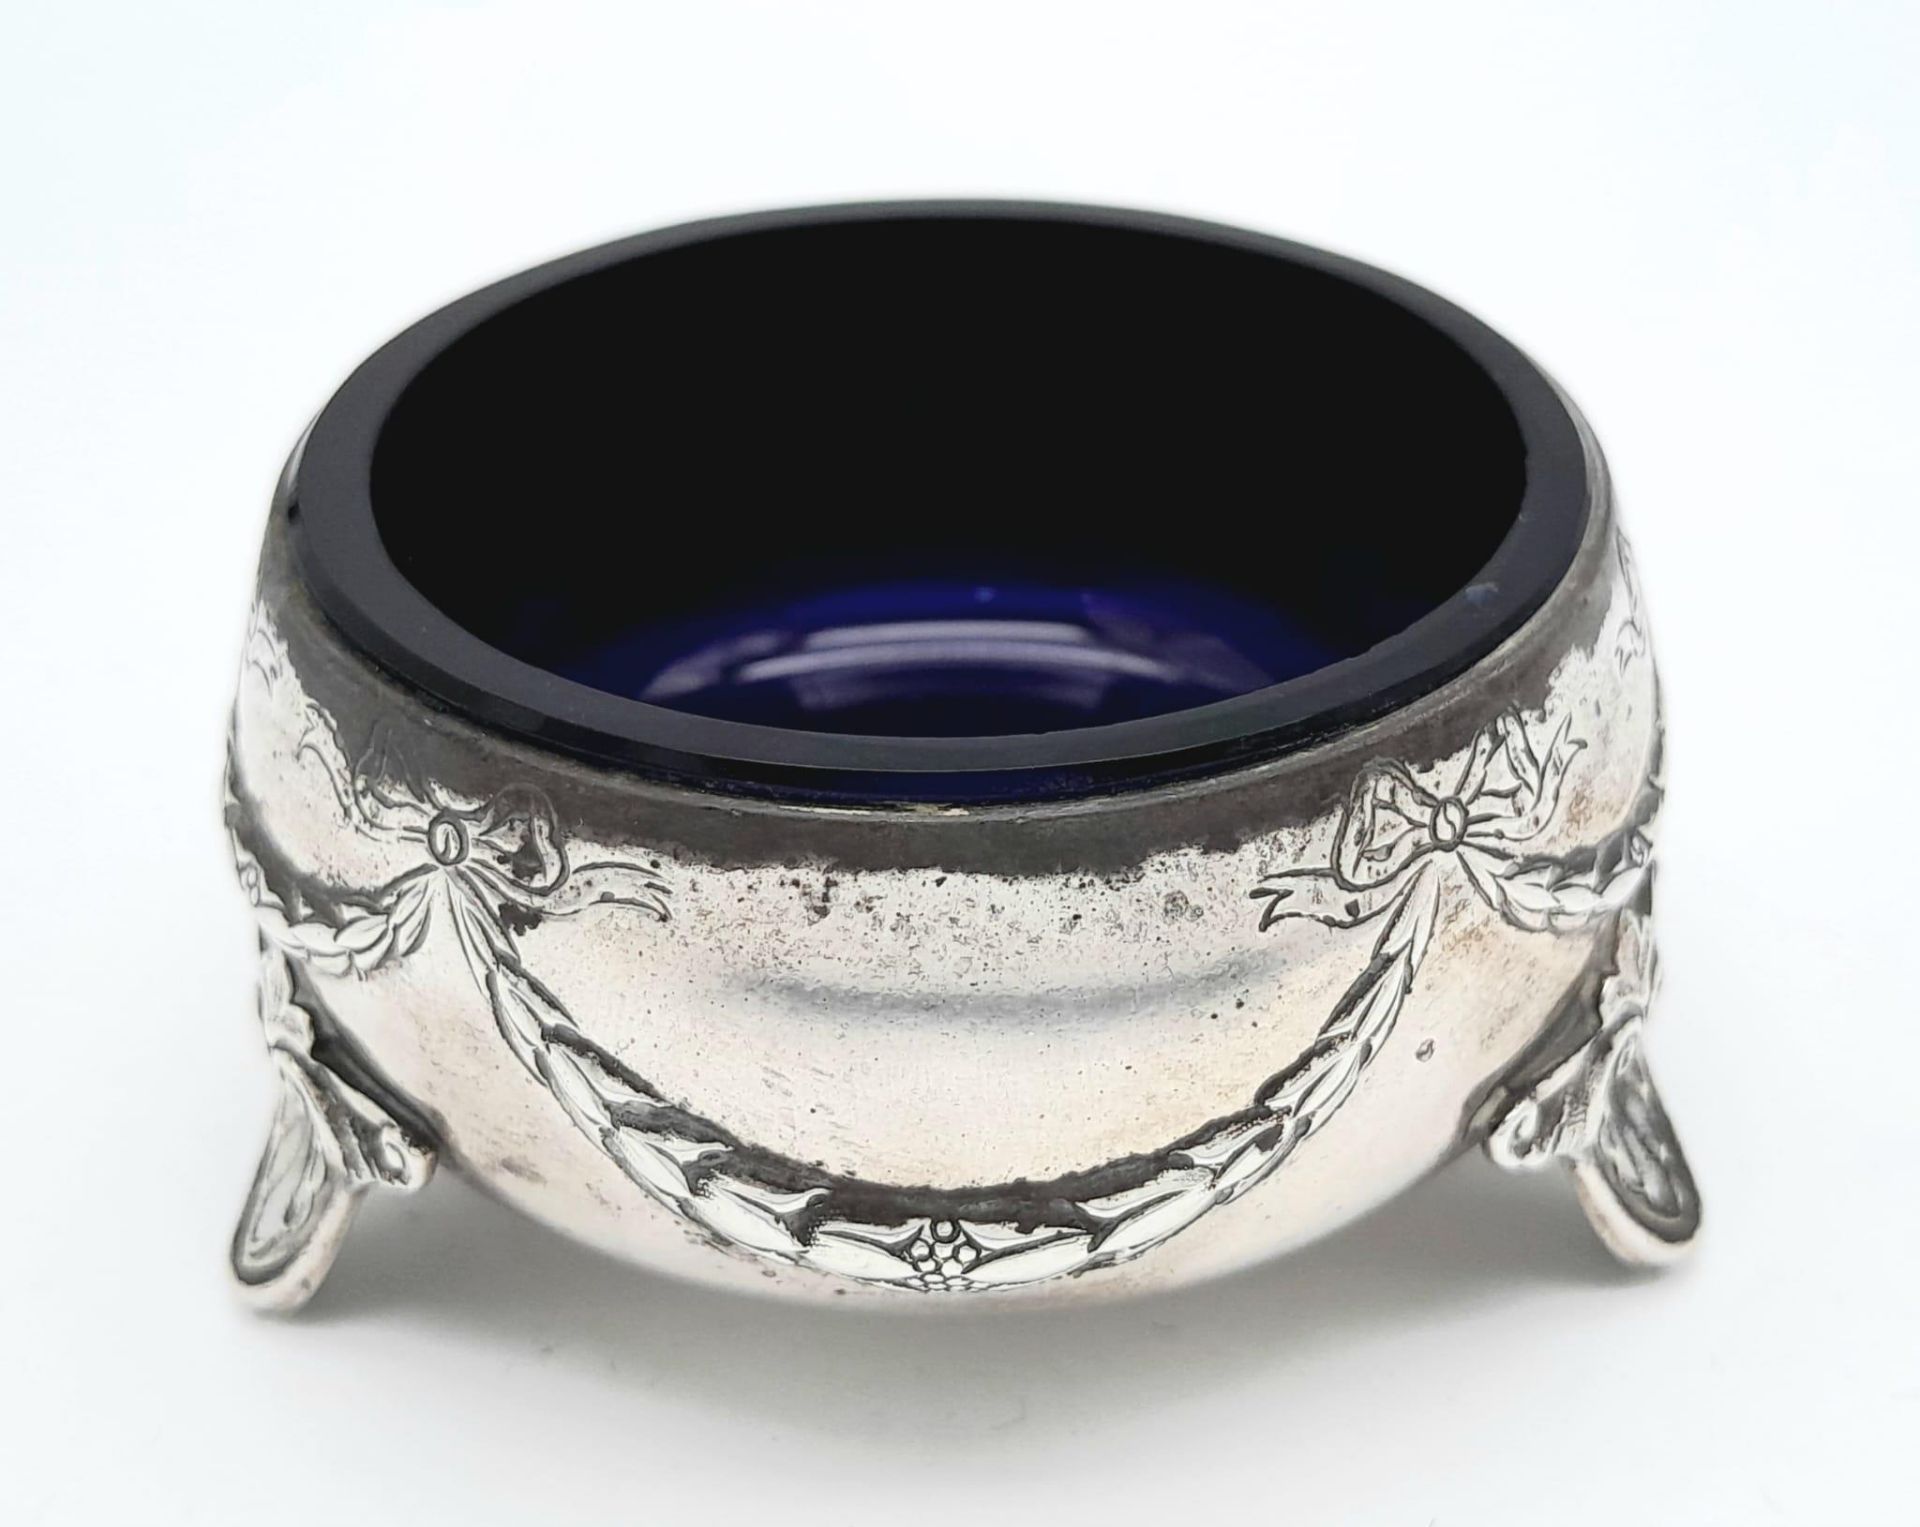 An antique Victorian sterling silver Salt cellar with fabulous engravings on feet (include blue